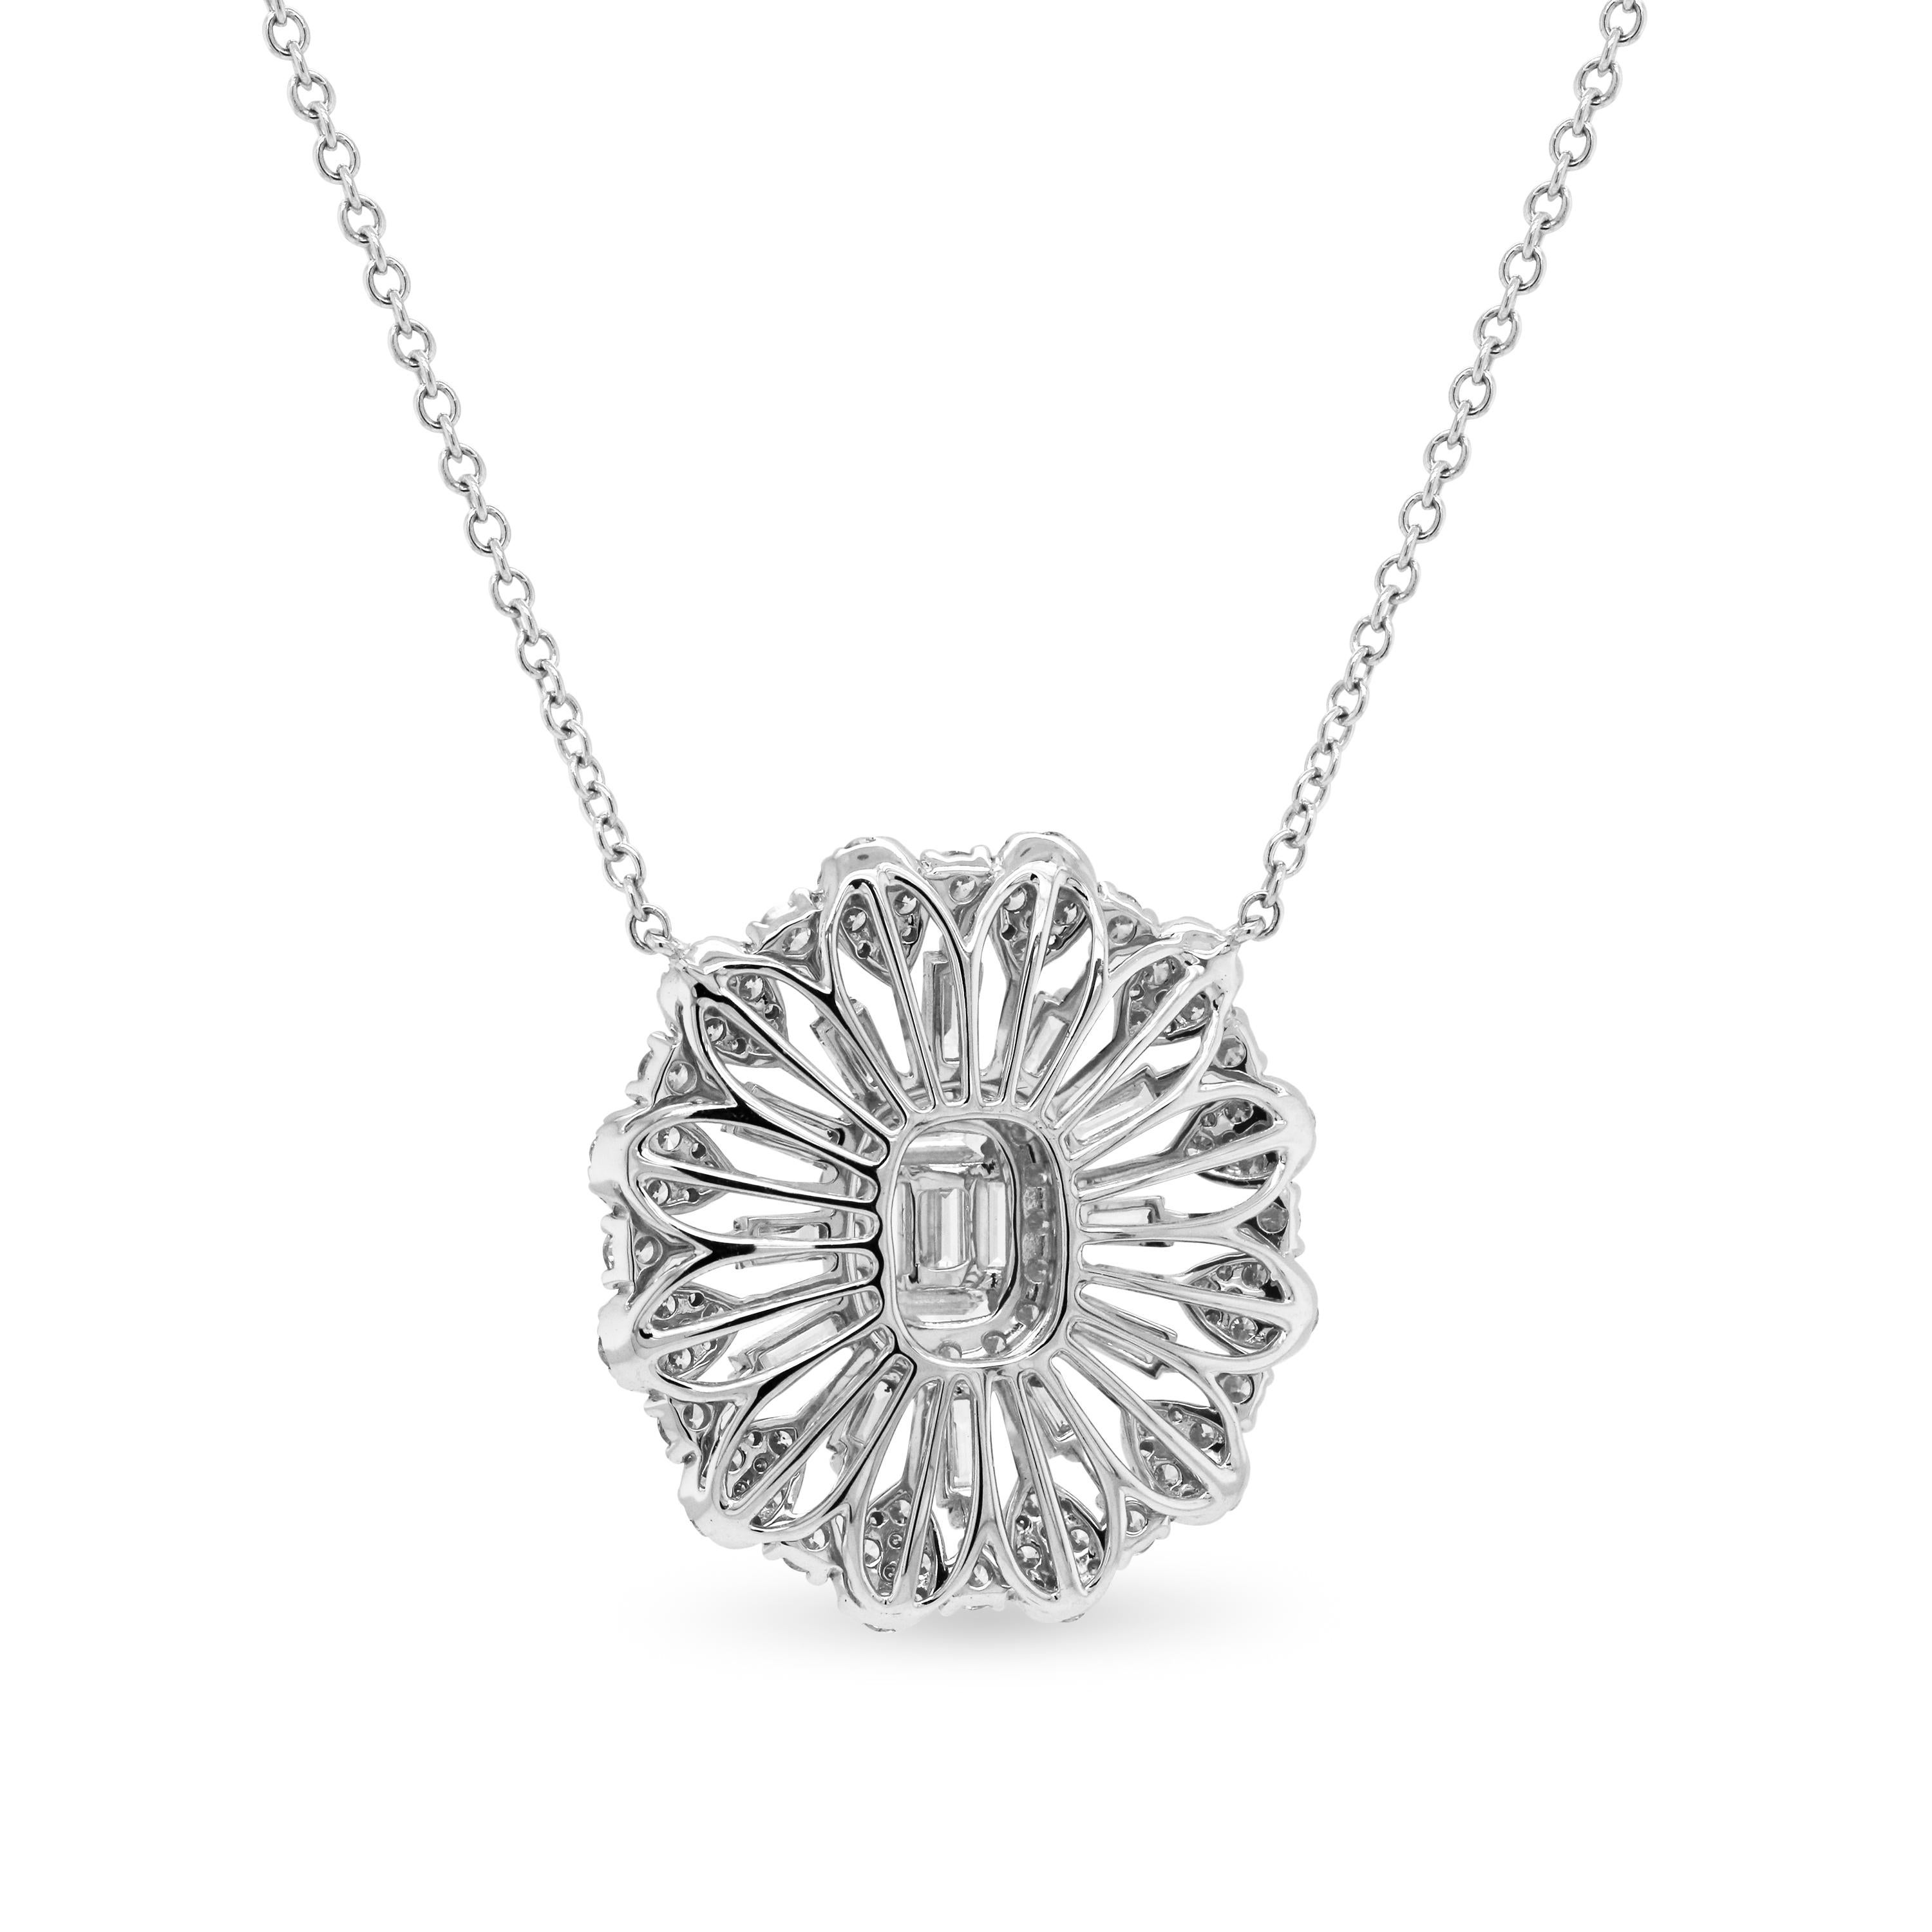 Baguette and Round Diamond 18K White Gold Circle Pendant Chain Necklace

Very chic and stylish, this beautiful pendant has baguette diamonds in the center that lead to round diamonds on the edge. Chain is attached from both sides of the